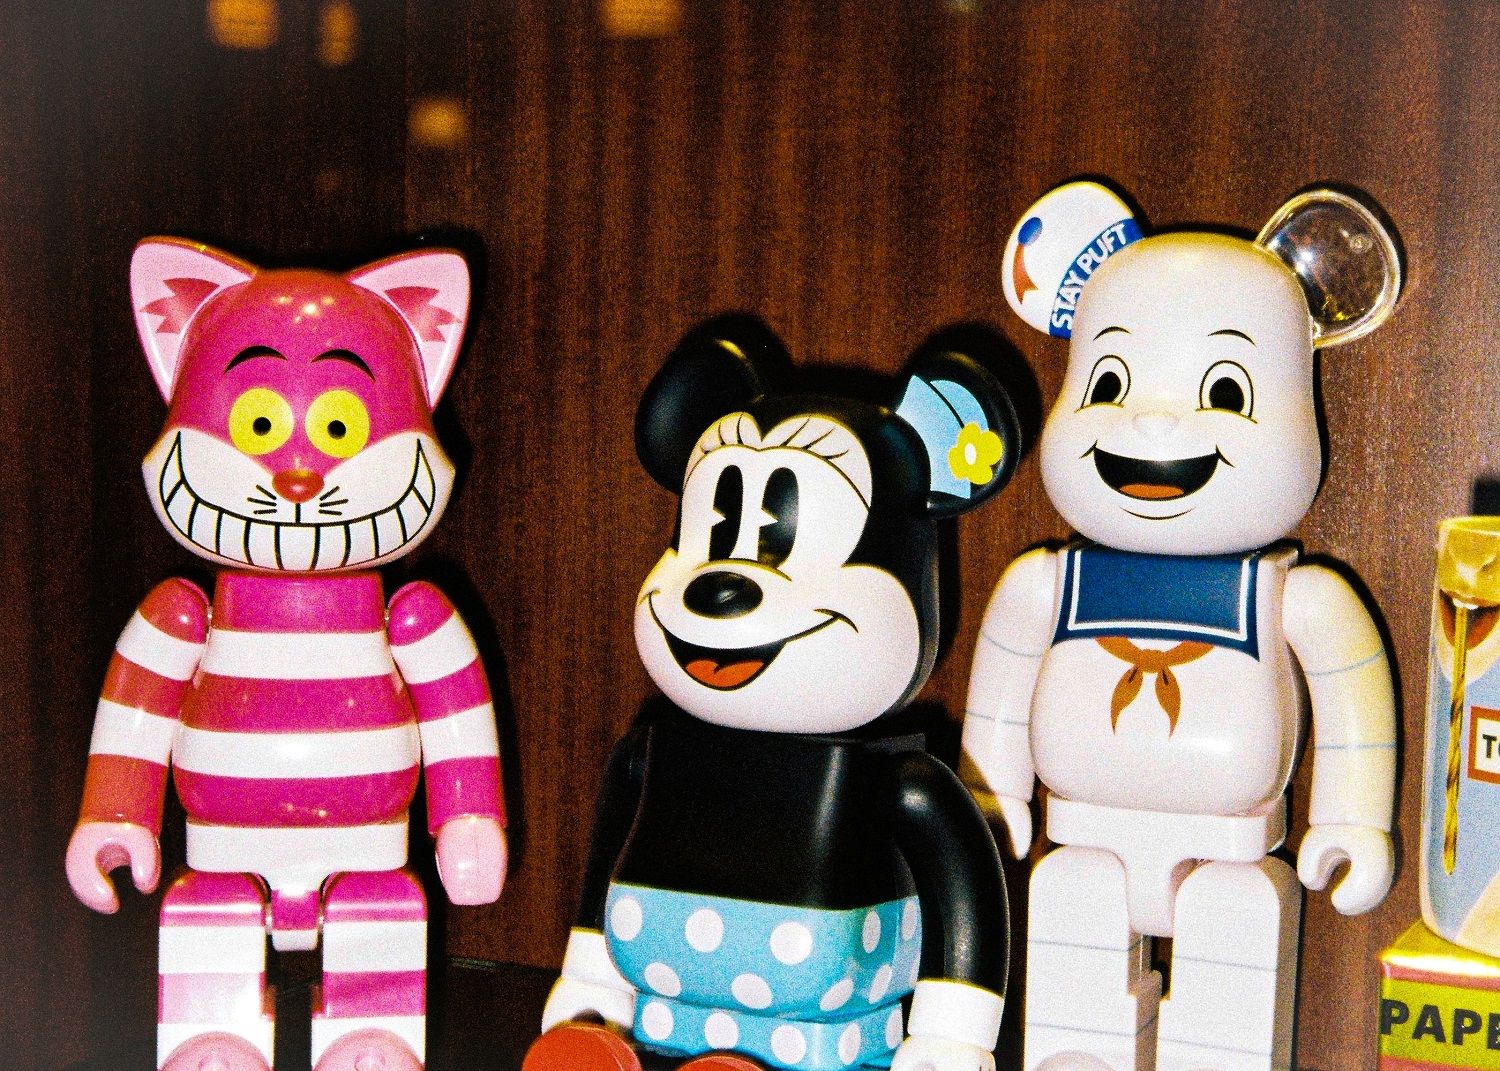 How Bearbrick became one of the biggest icons, and to start collecting